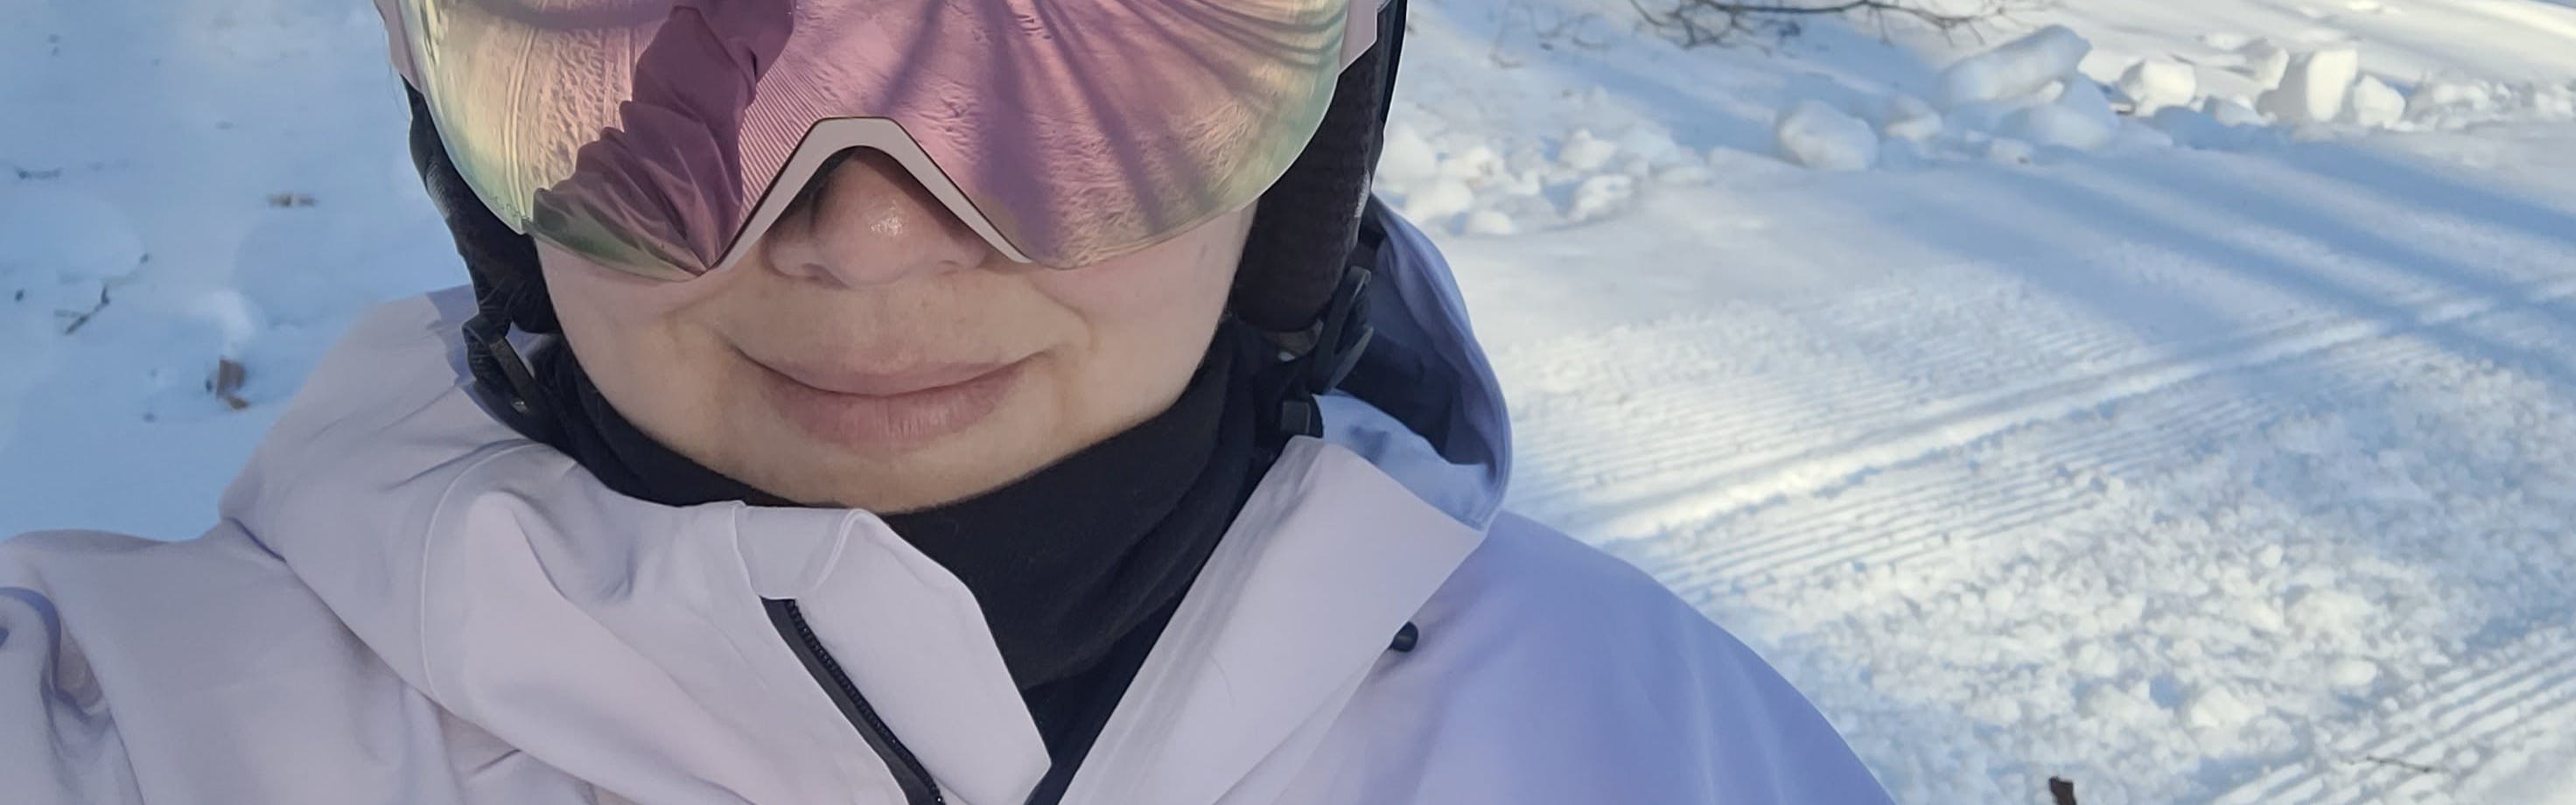 A snowboarder in the The North Face Women's Ceptor Shell Jacket.